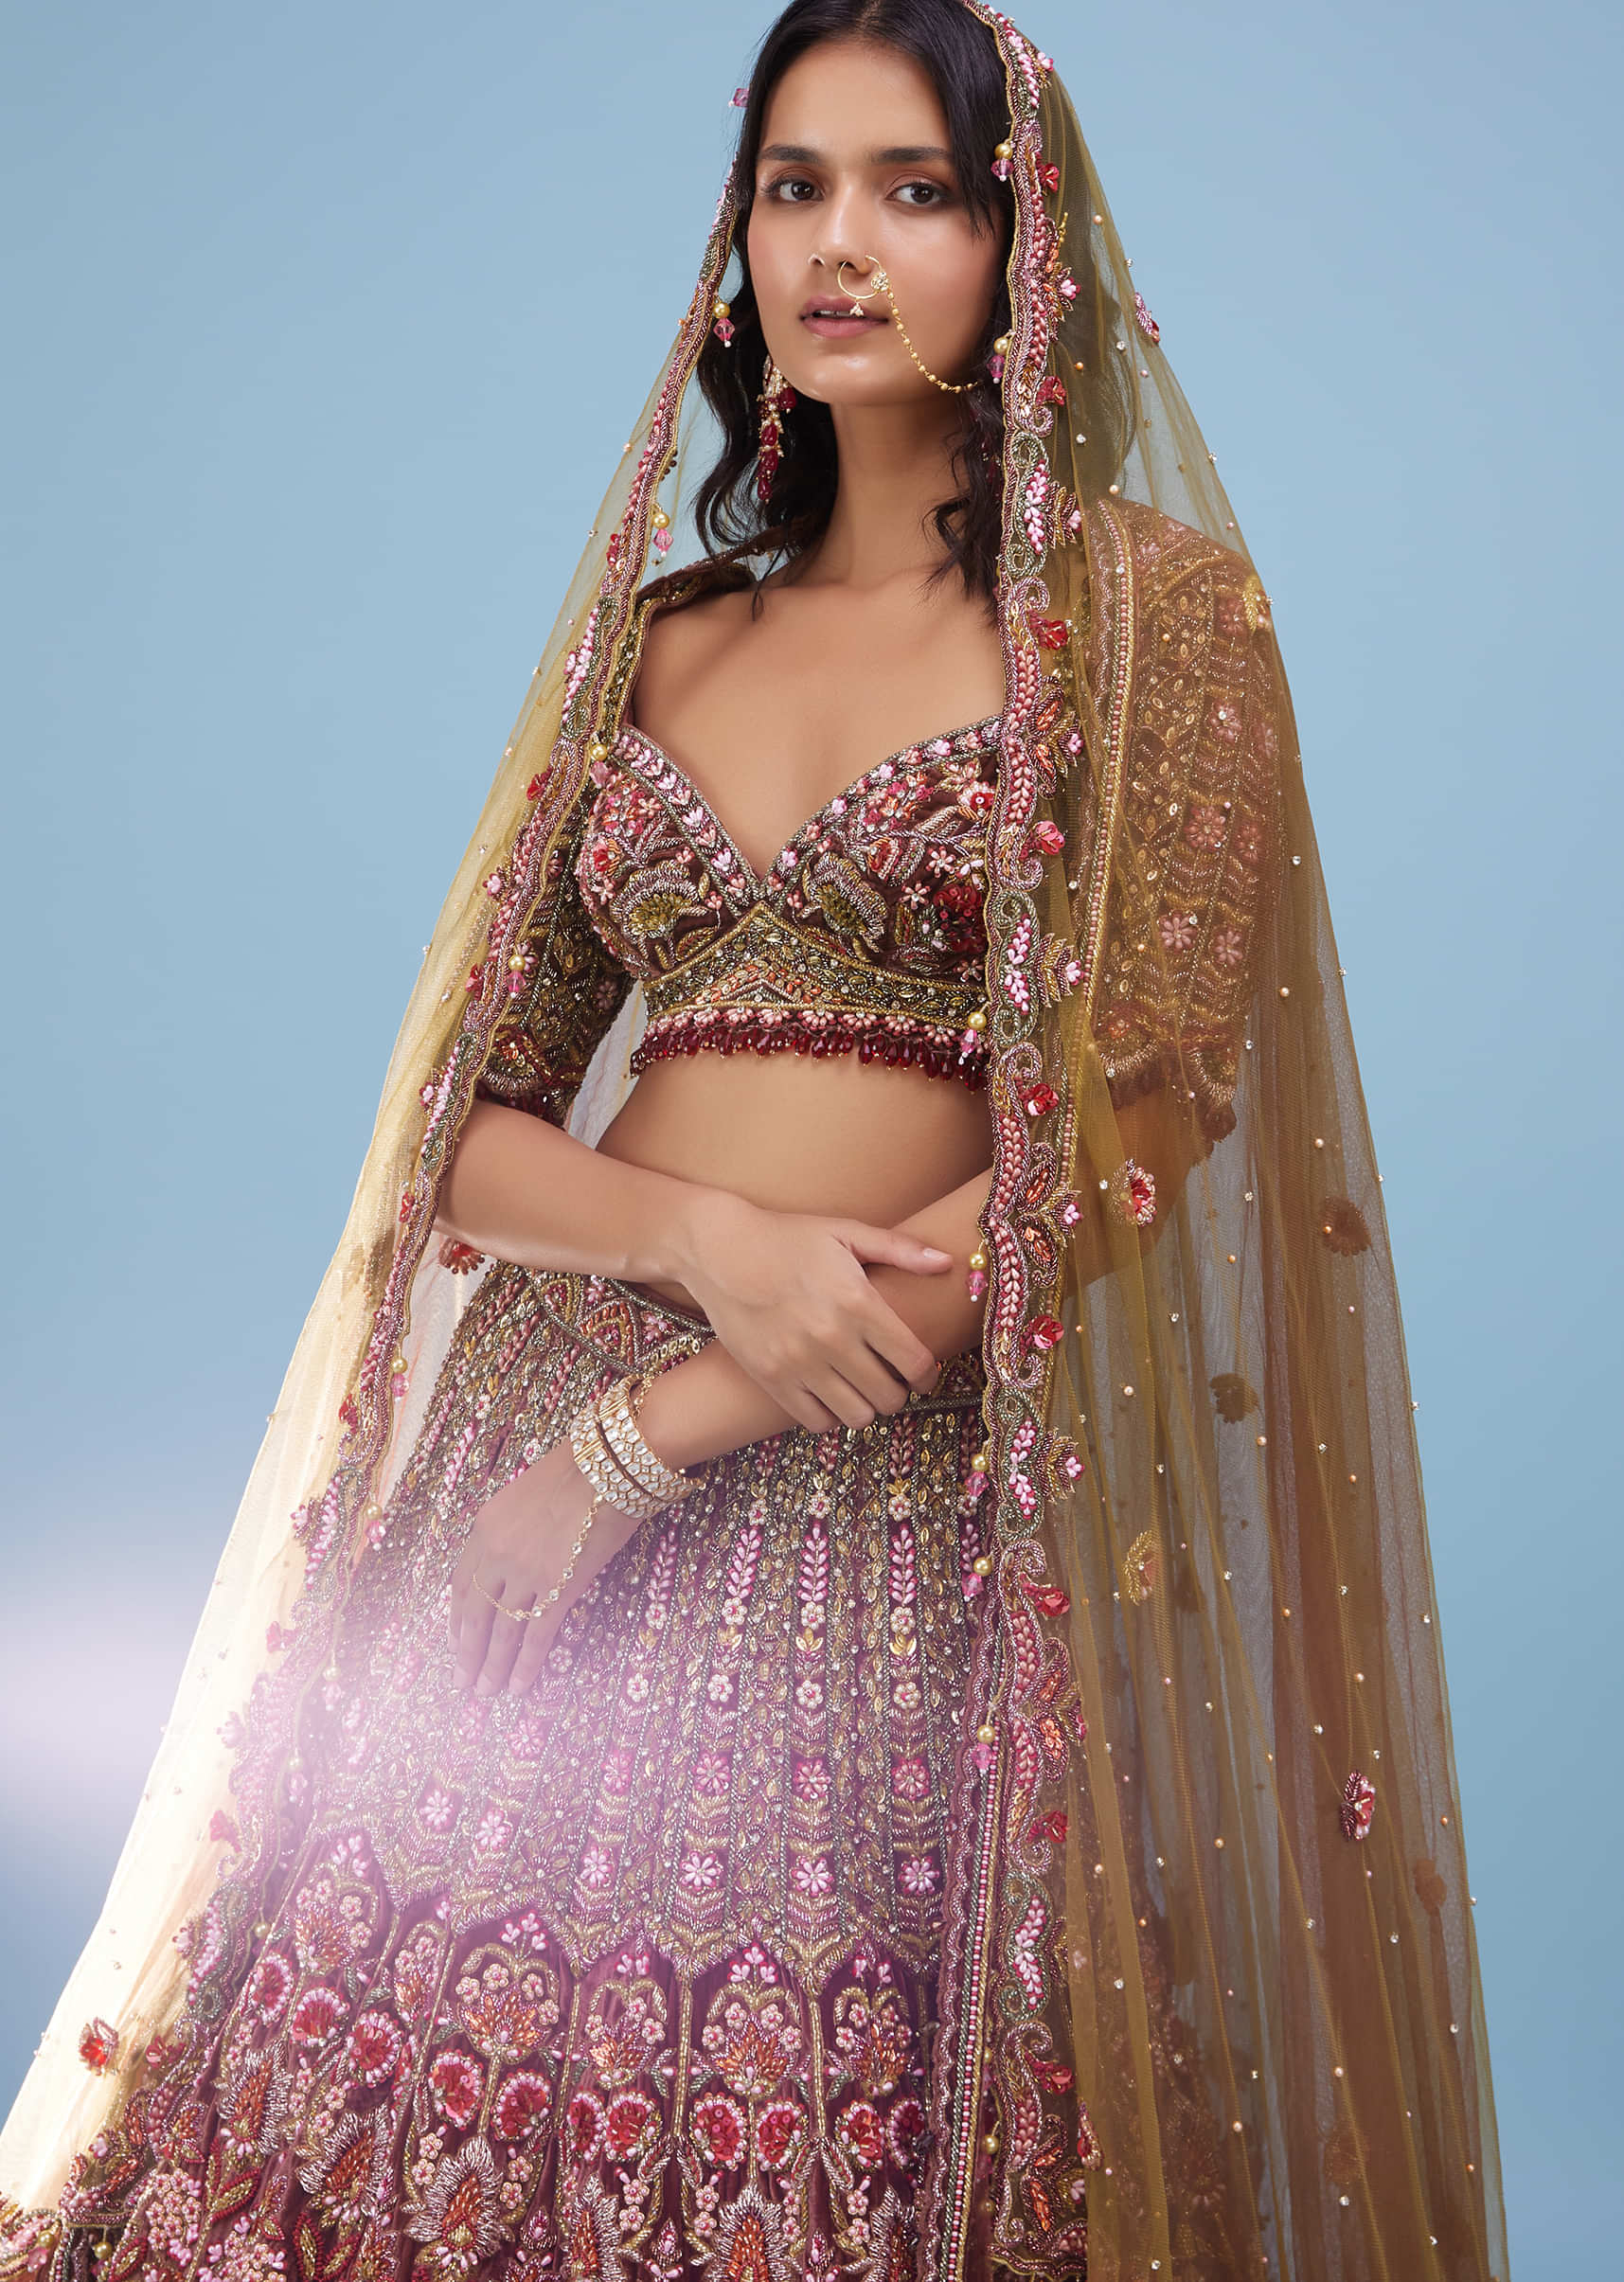 Chocolate Brown Maharani Bridal Lehenga Fabricated In Velvet With Heavy Floral Embroidery - NOOR 2022